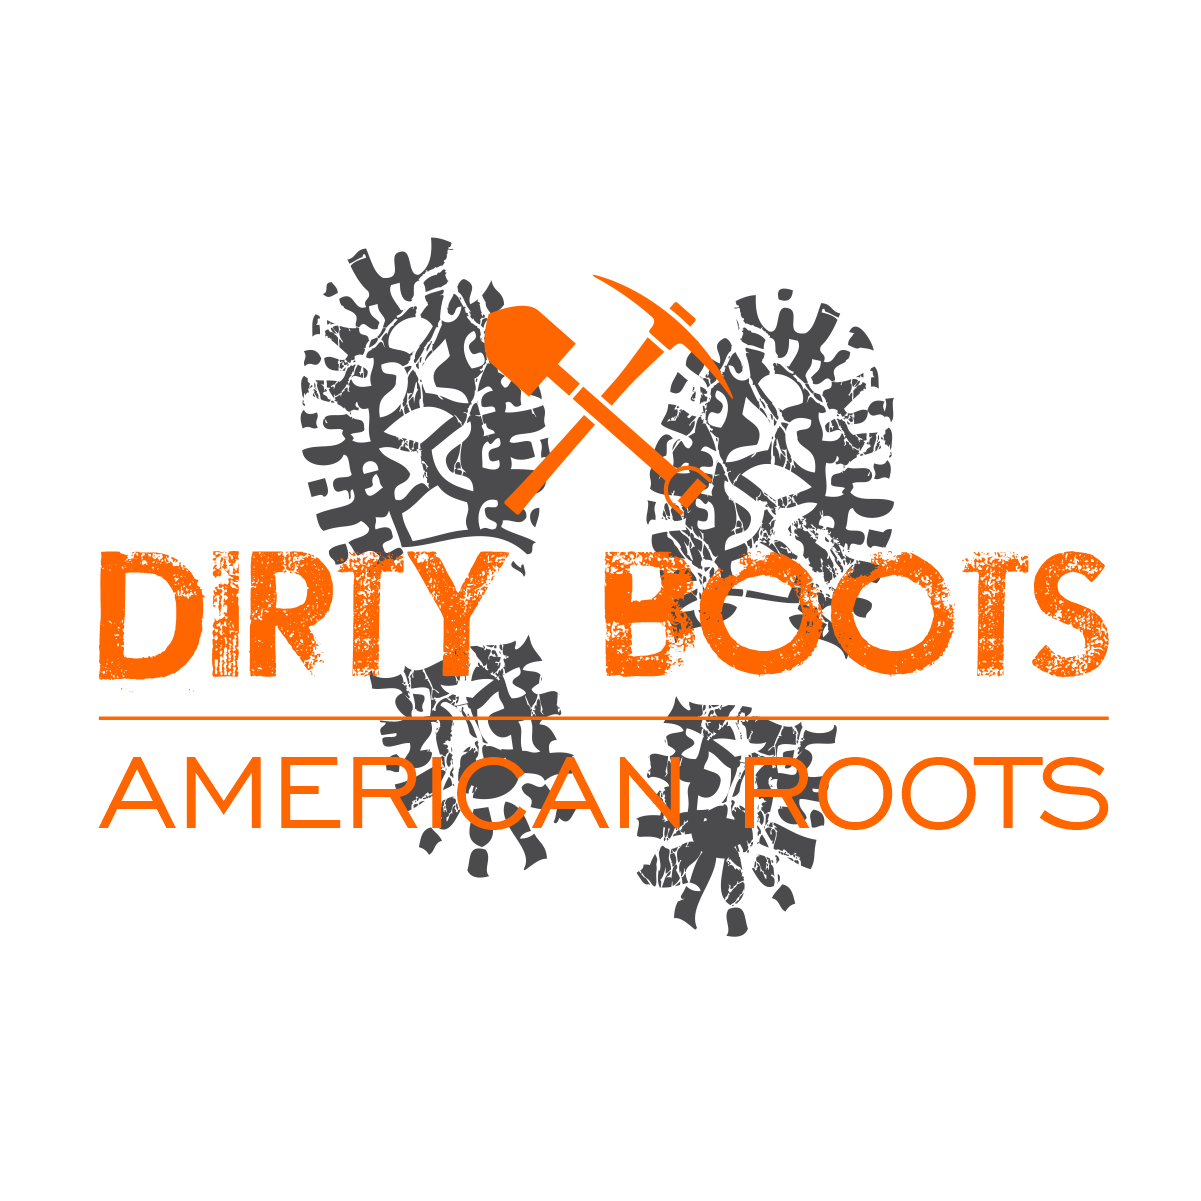 DIRTY BOOTS AMERICAN ROOTS